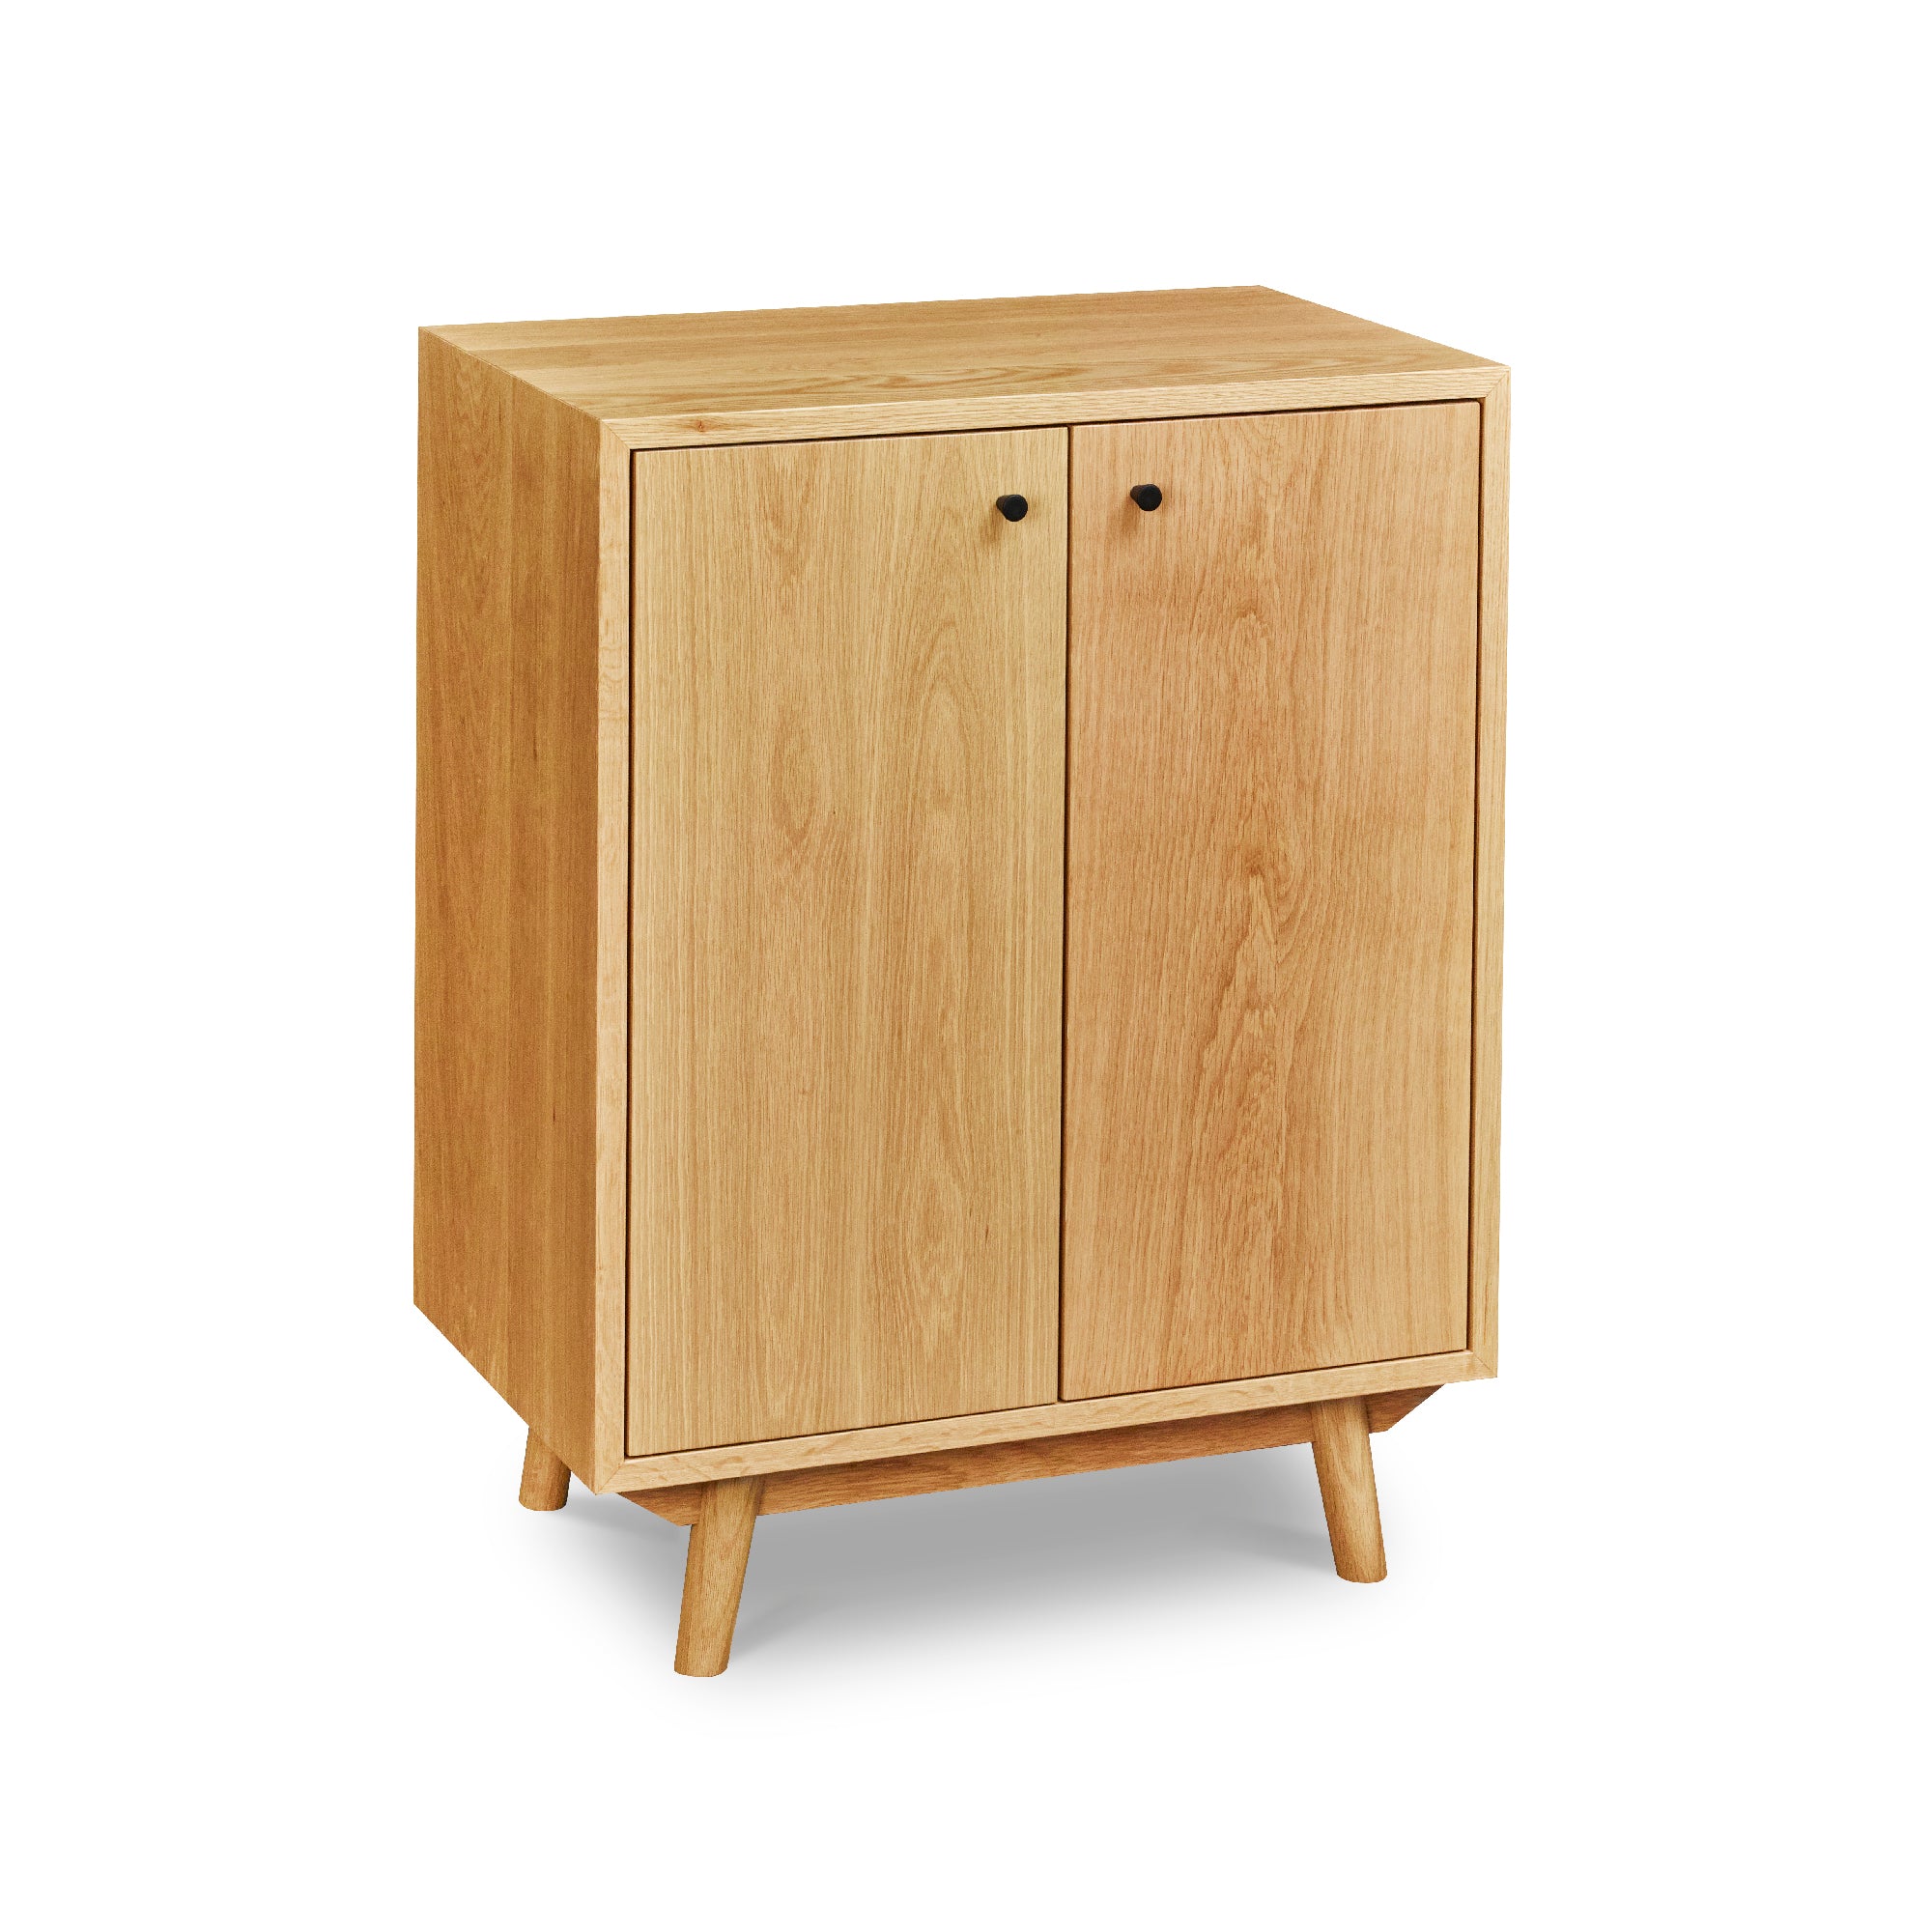 Mid-century Scandinavian inspired sideboard with angled legs in solid white oak wood